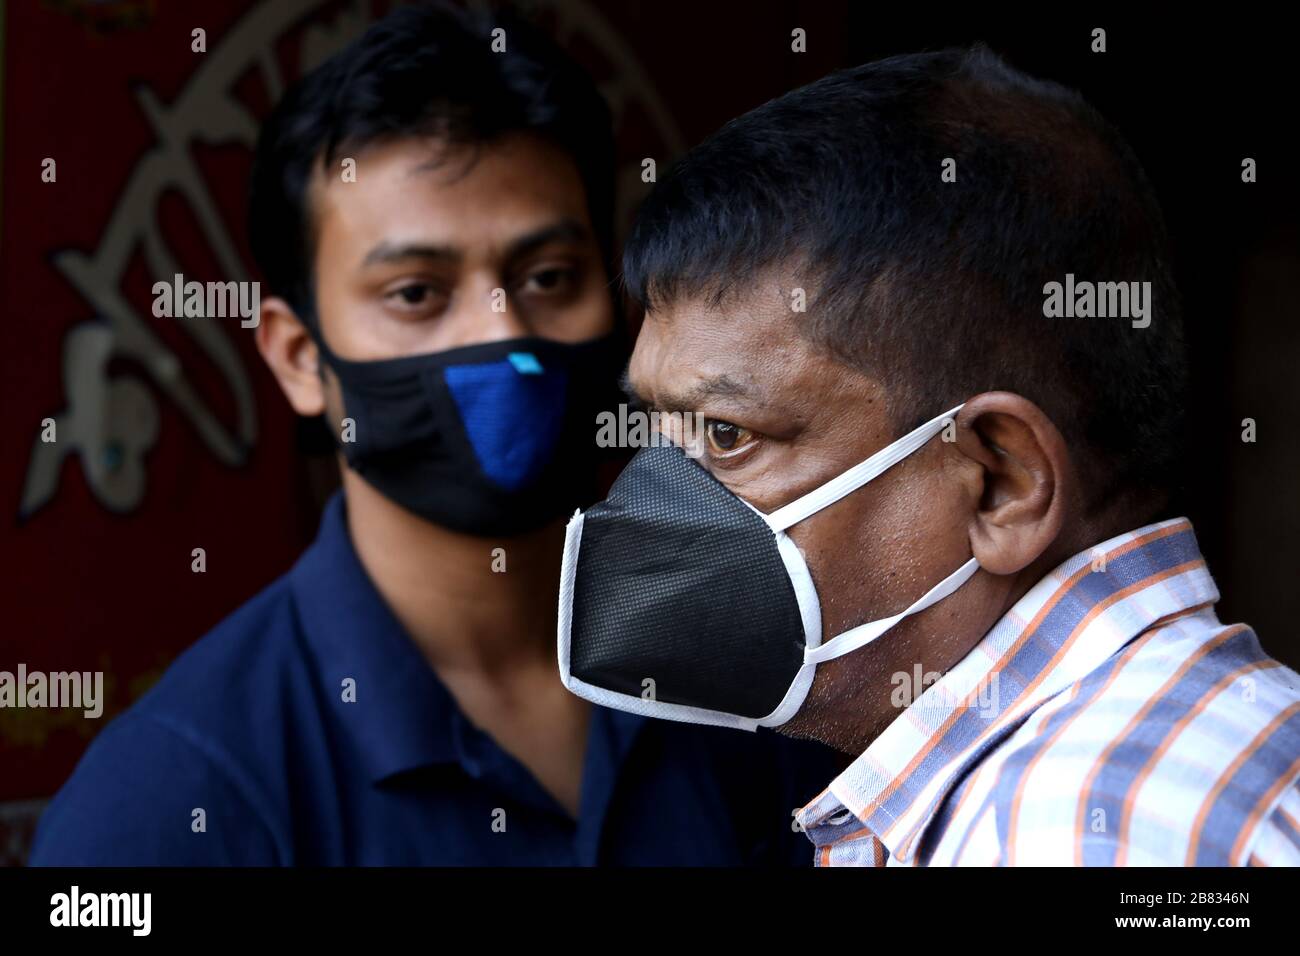 (200319) -- DHAKA, March 19, 2020 (Xinhua) -- People wearing face masks wait for bus at a station in Dhaka, Bangladesh, on March 19, 2020. A total of 17 cases of COVID-19 have been confirmed in Bangladesh with three more testing positive for the virus on Thursday. (Str/Xinhua) Stock Photo